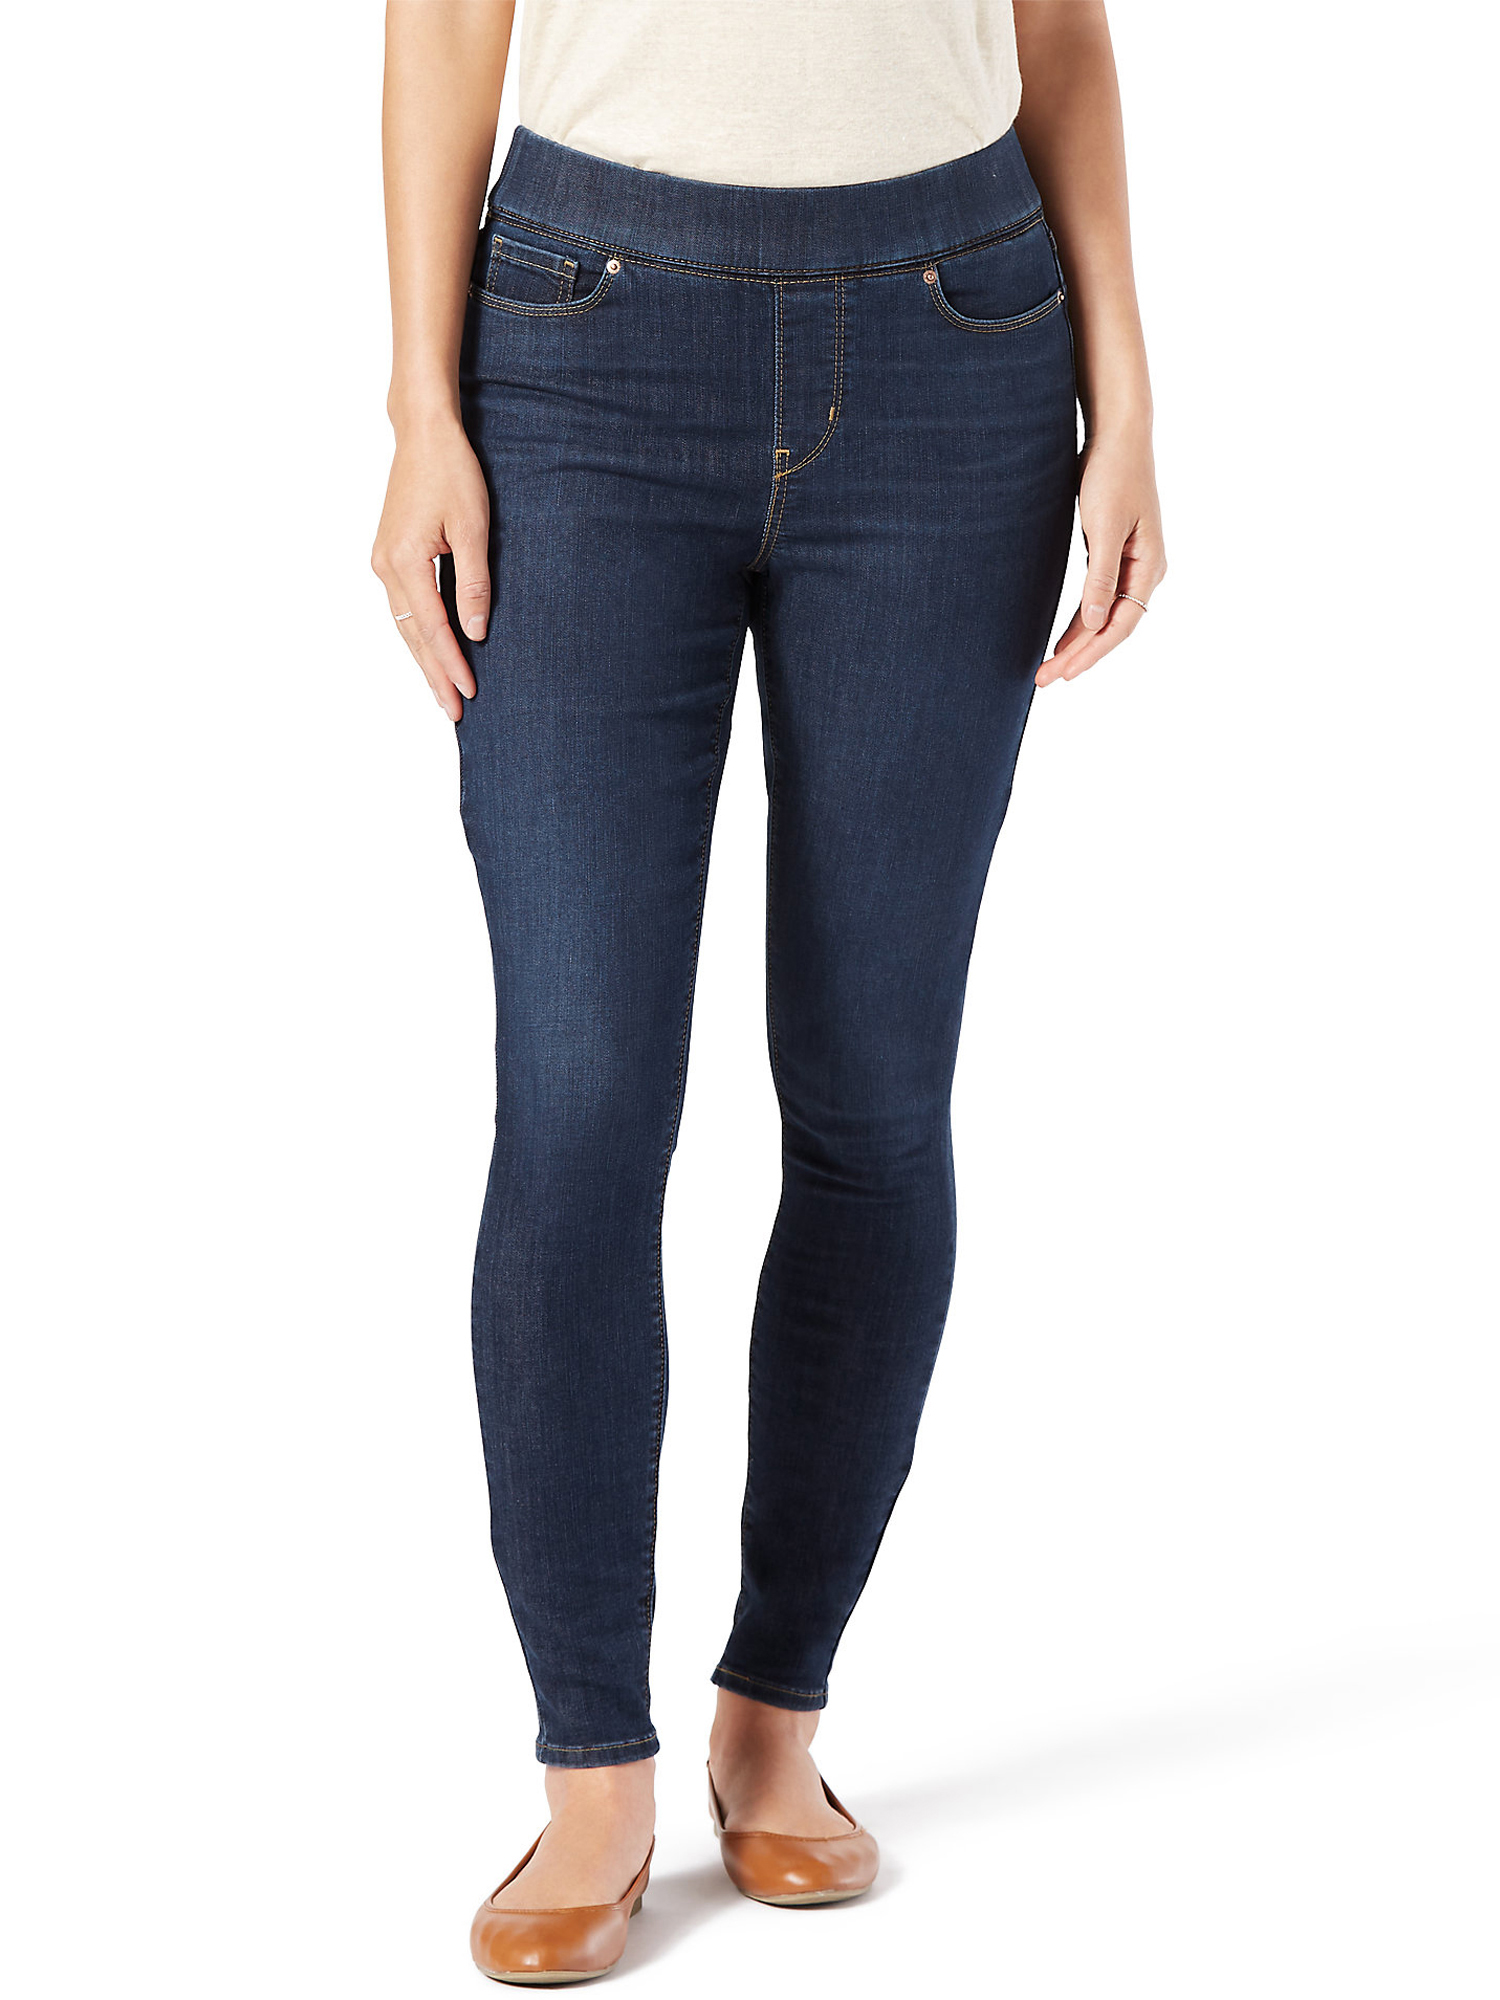 Signature by Levi Strauss & Co. Women's Simply Stretch Shaping Pull-On Super Skinny Jeans - image 1 of 6